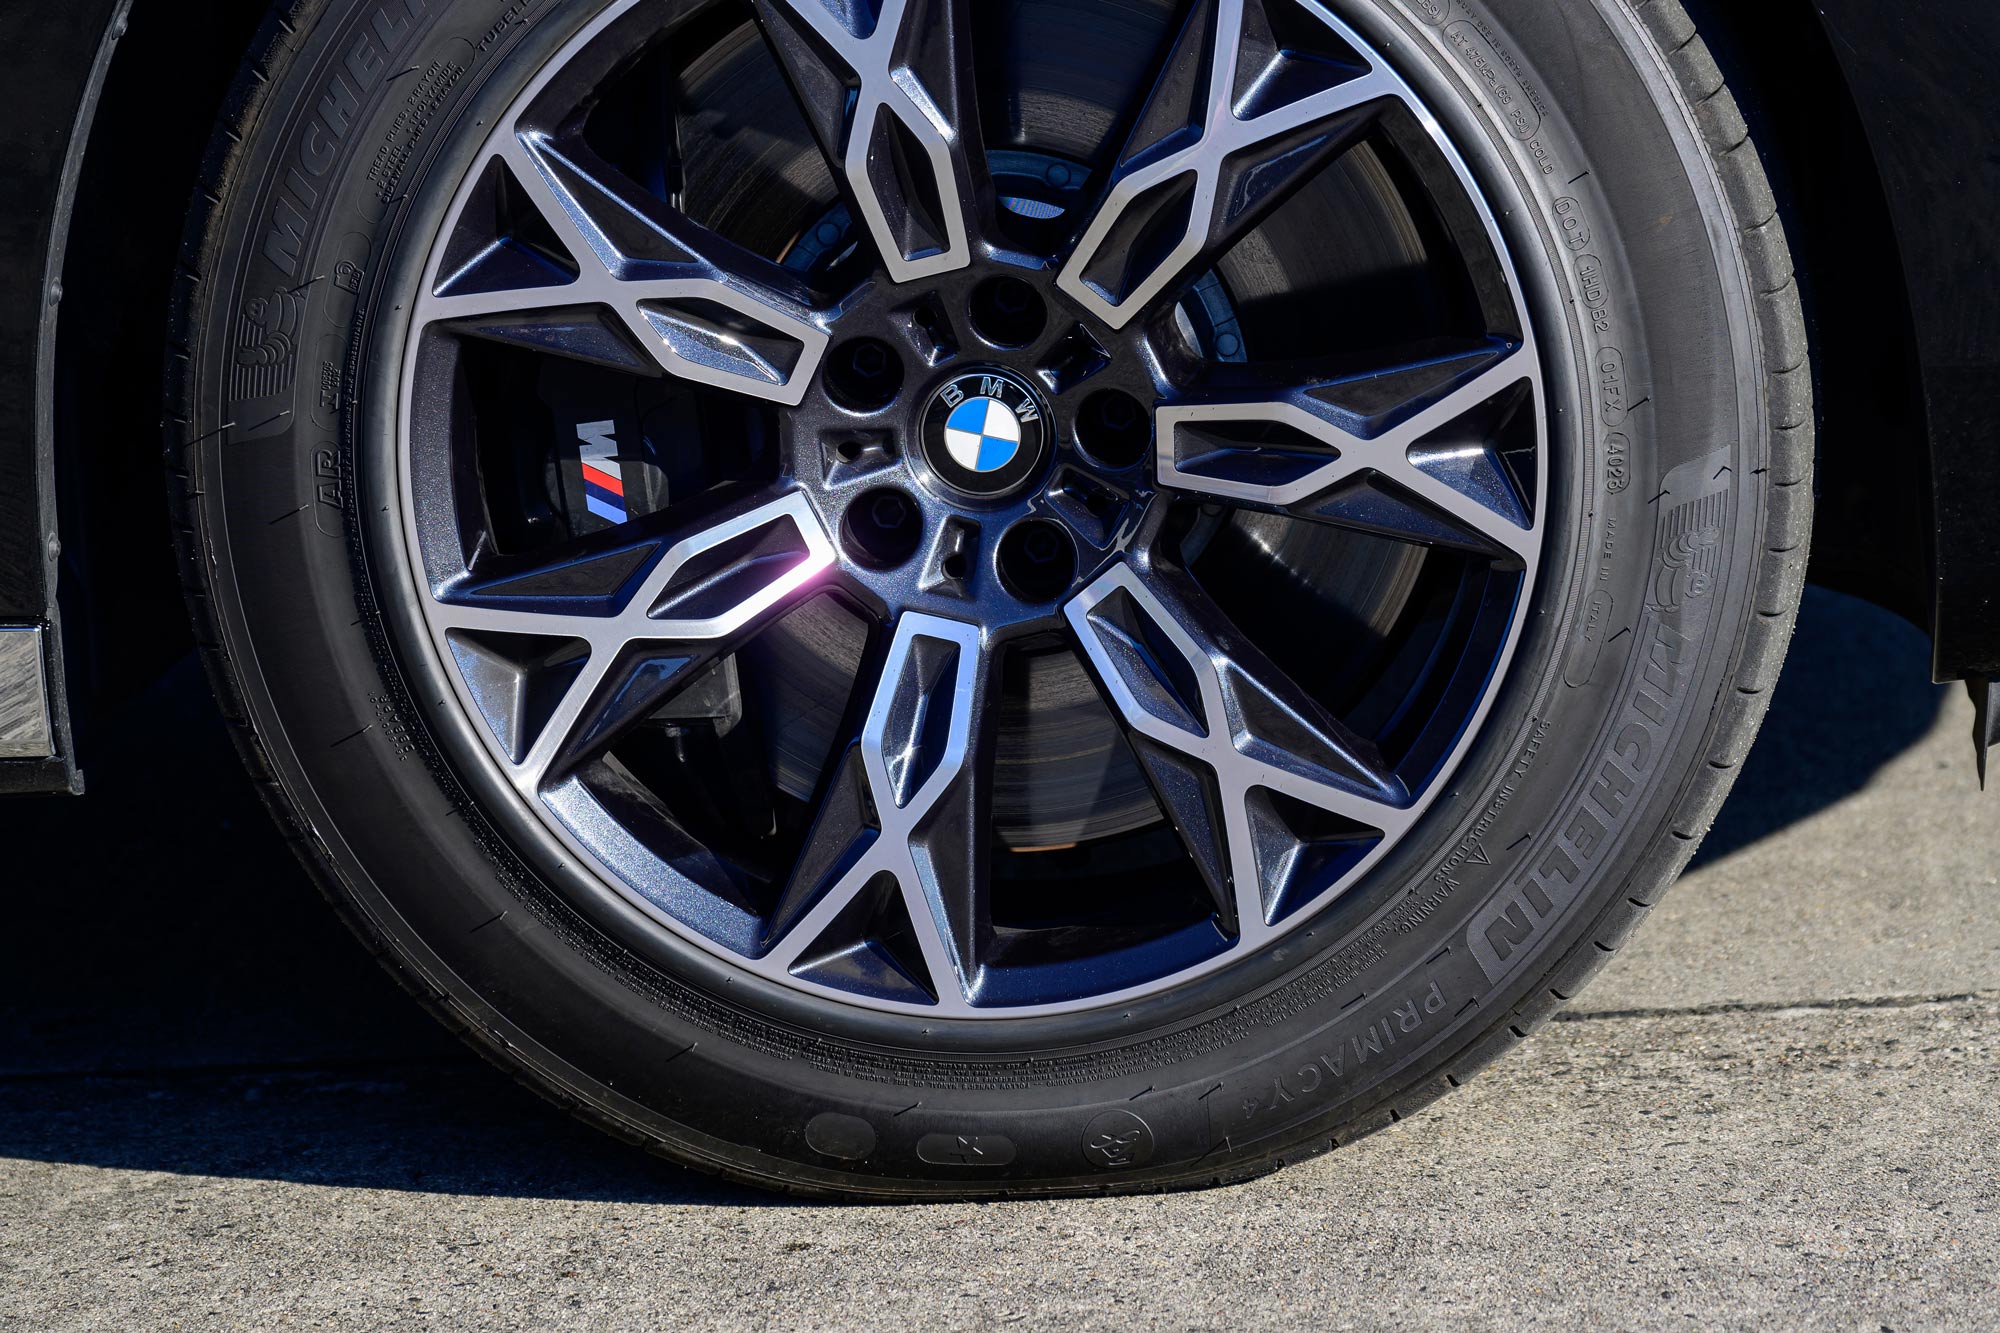 Close-up of Michelin tire made specifically for BMW on the BMW 760i